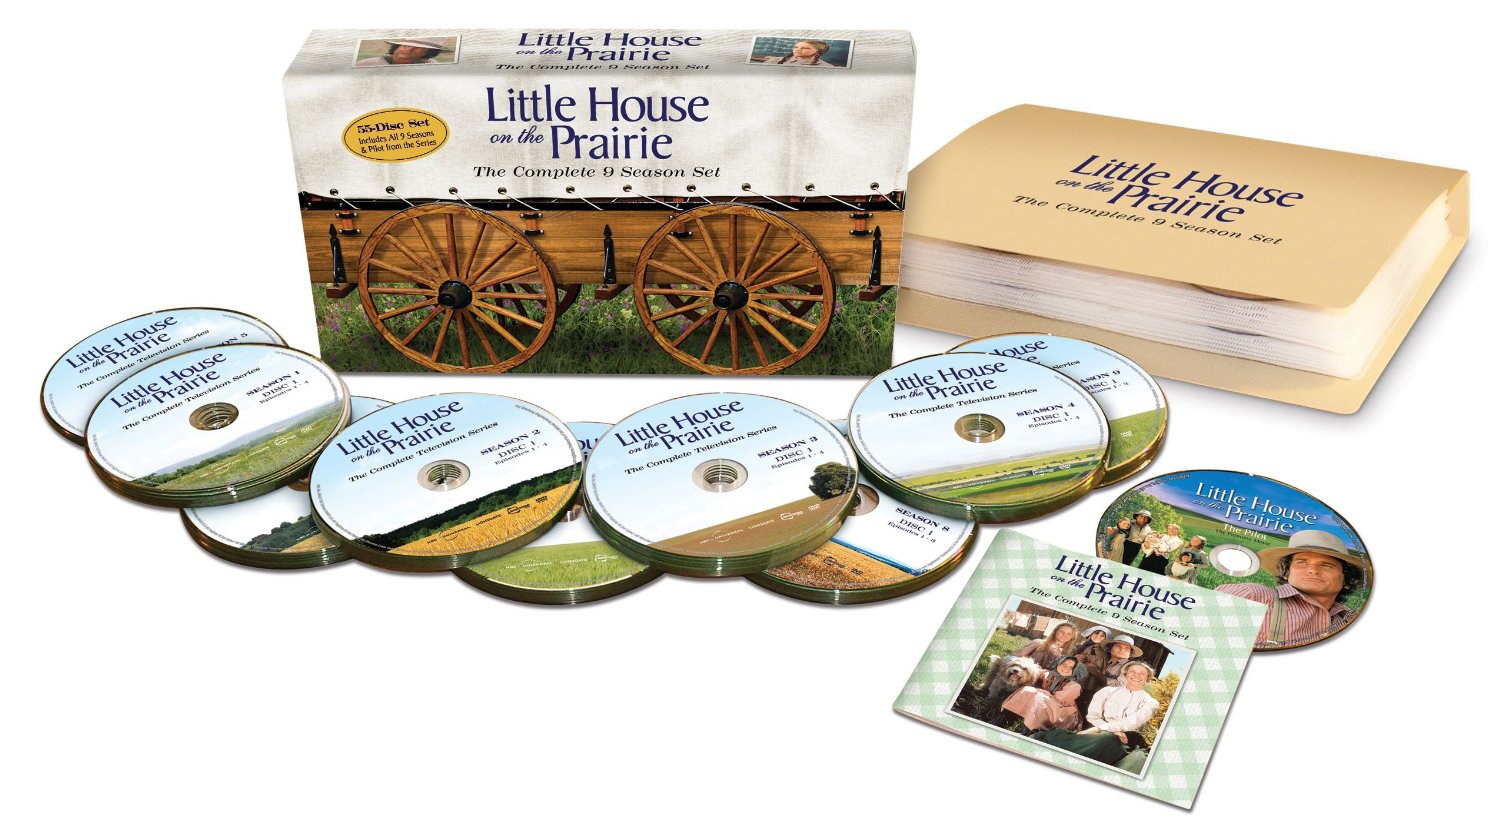 dvd little house on the prairie complete television series